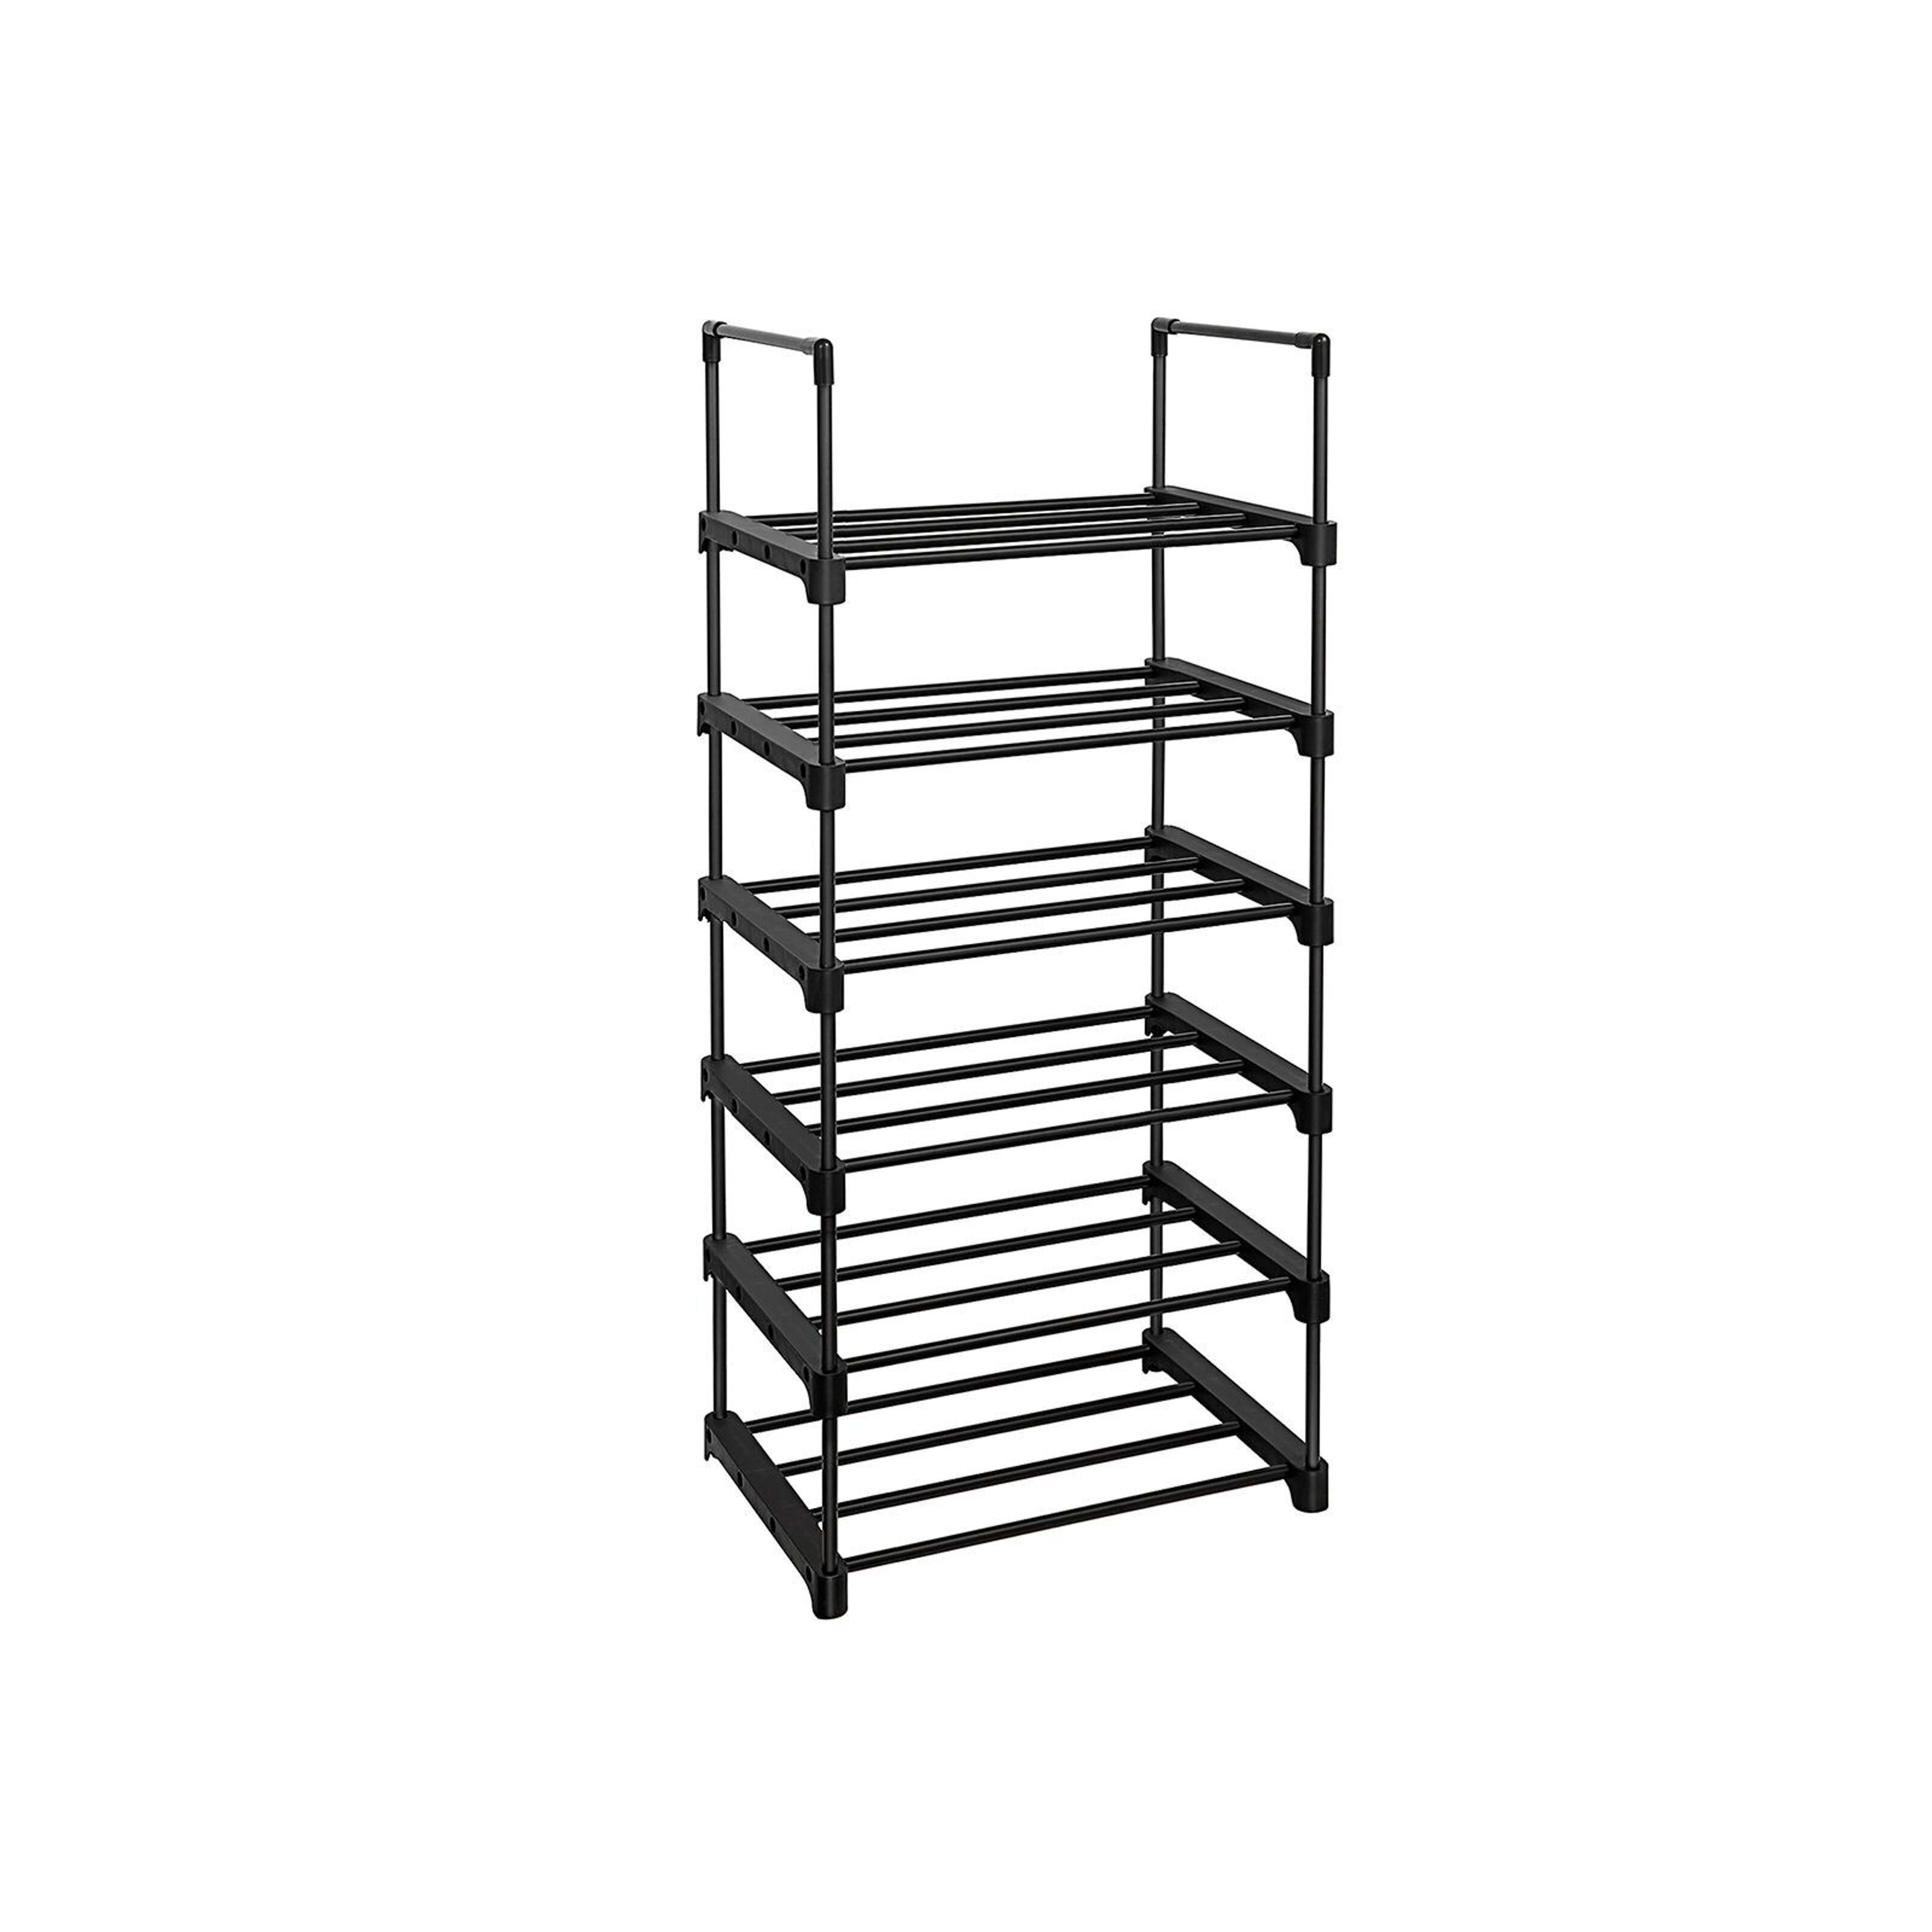 4-tier Small Shoe Rack, Black Color, Each Tier Reinforced With 4